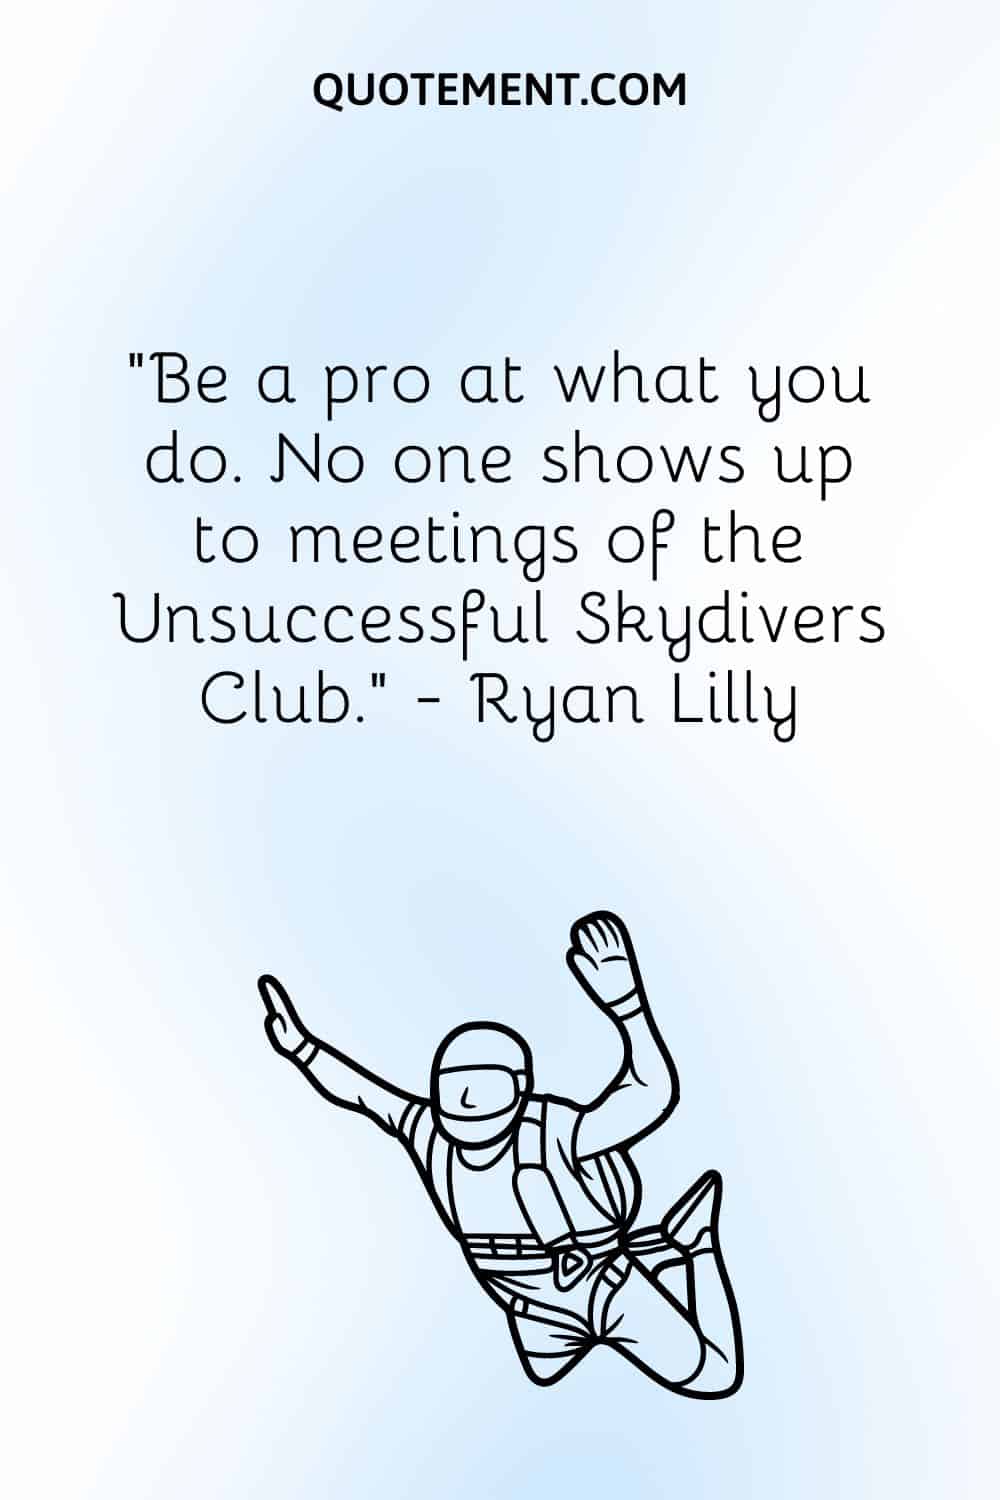 Be a pro at what you do. No one shows up to meetings of the Unsuccessful Skydivers Club.